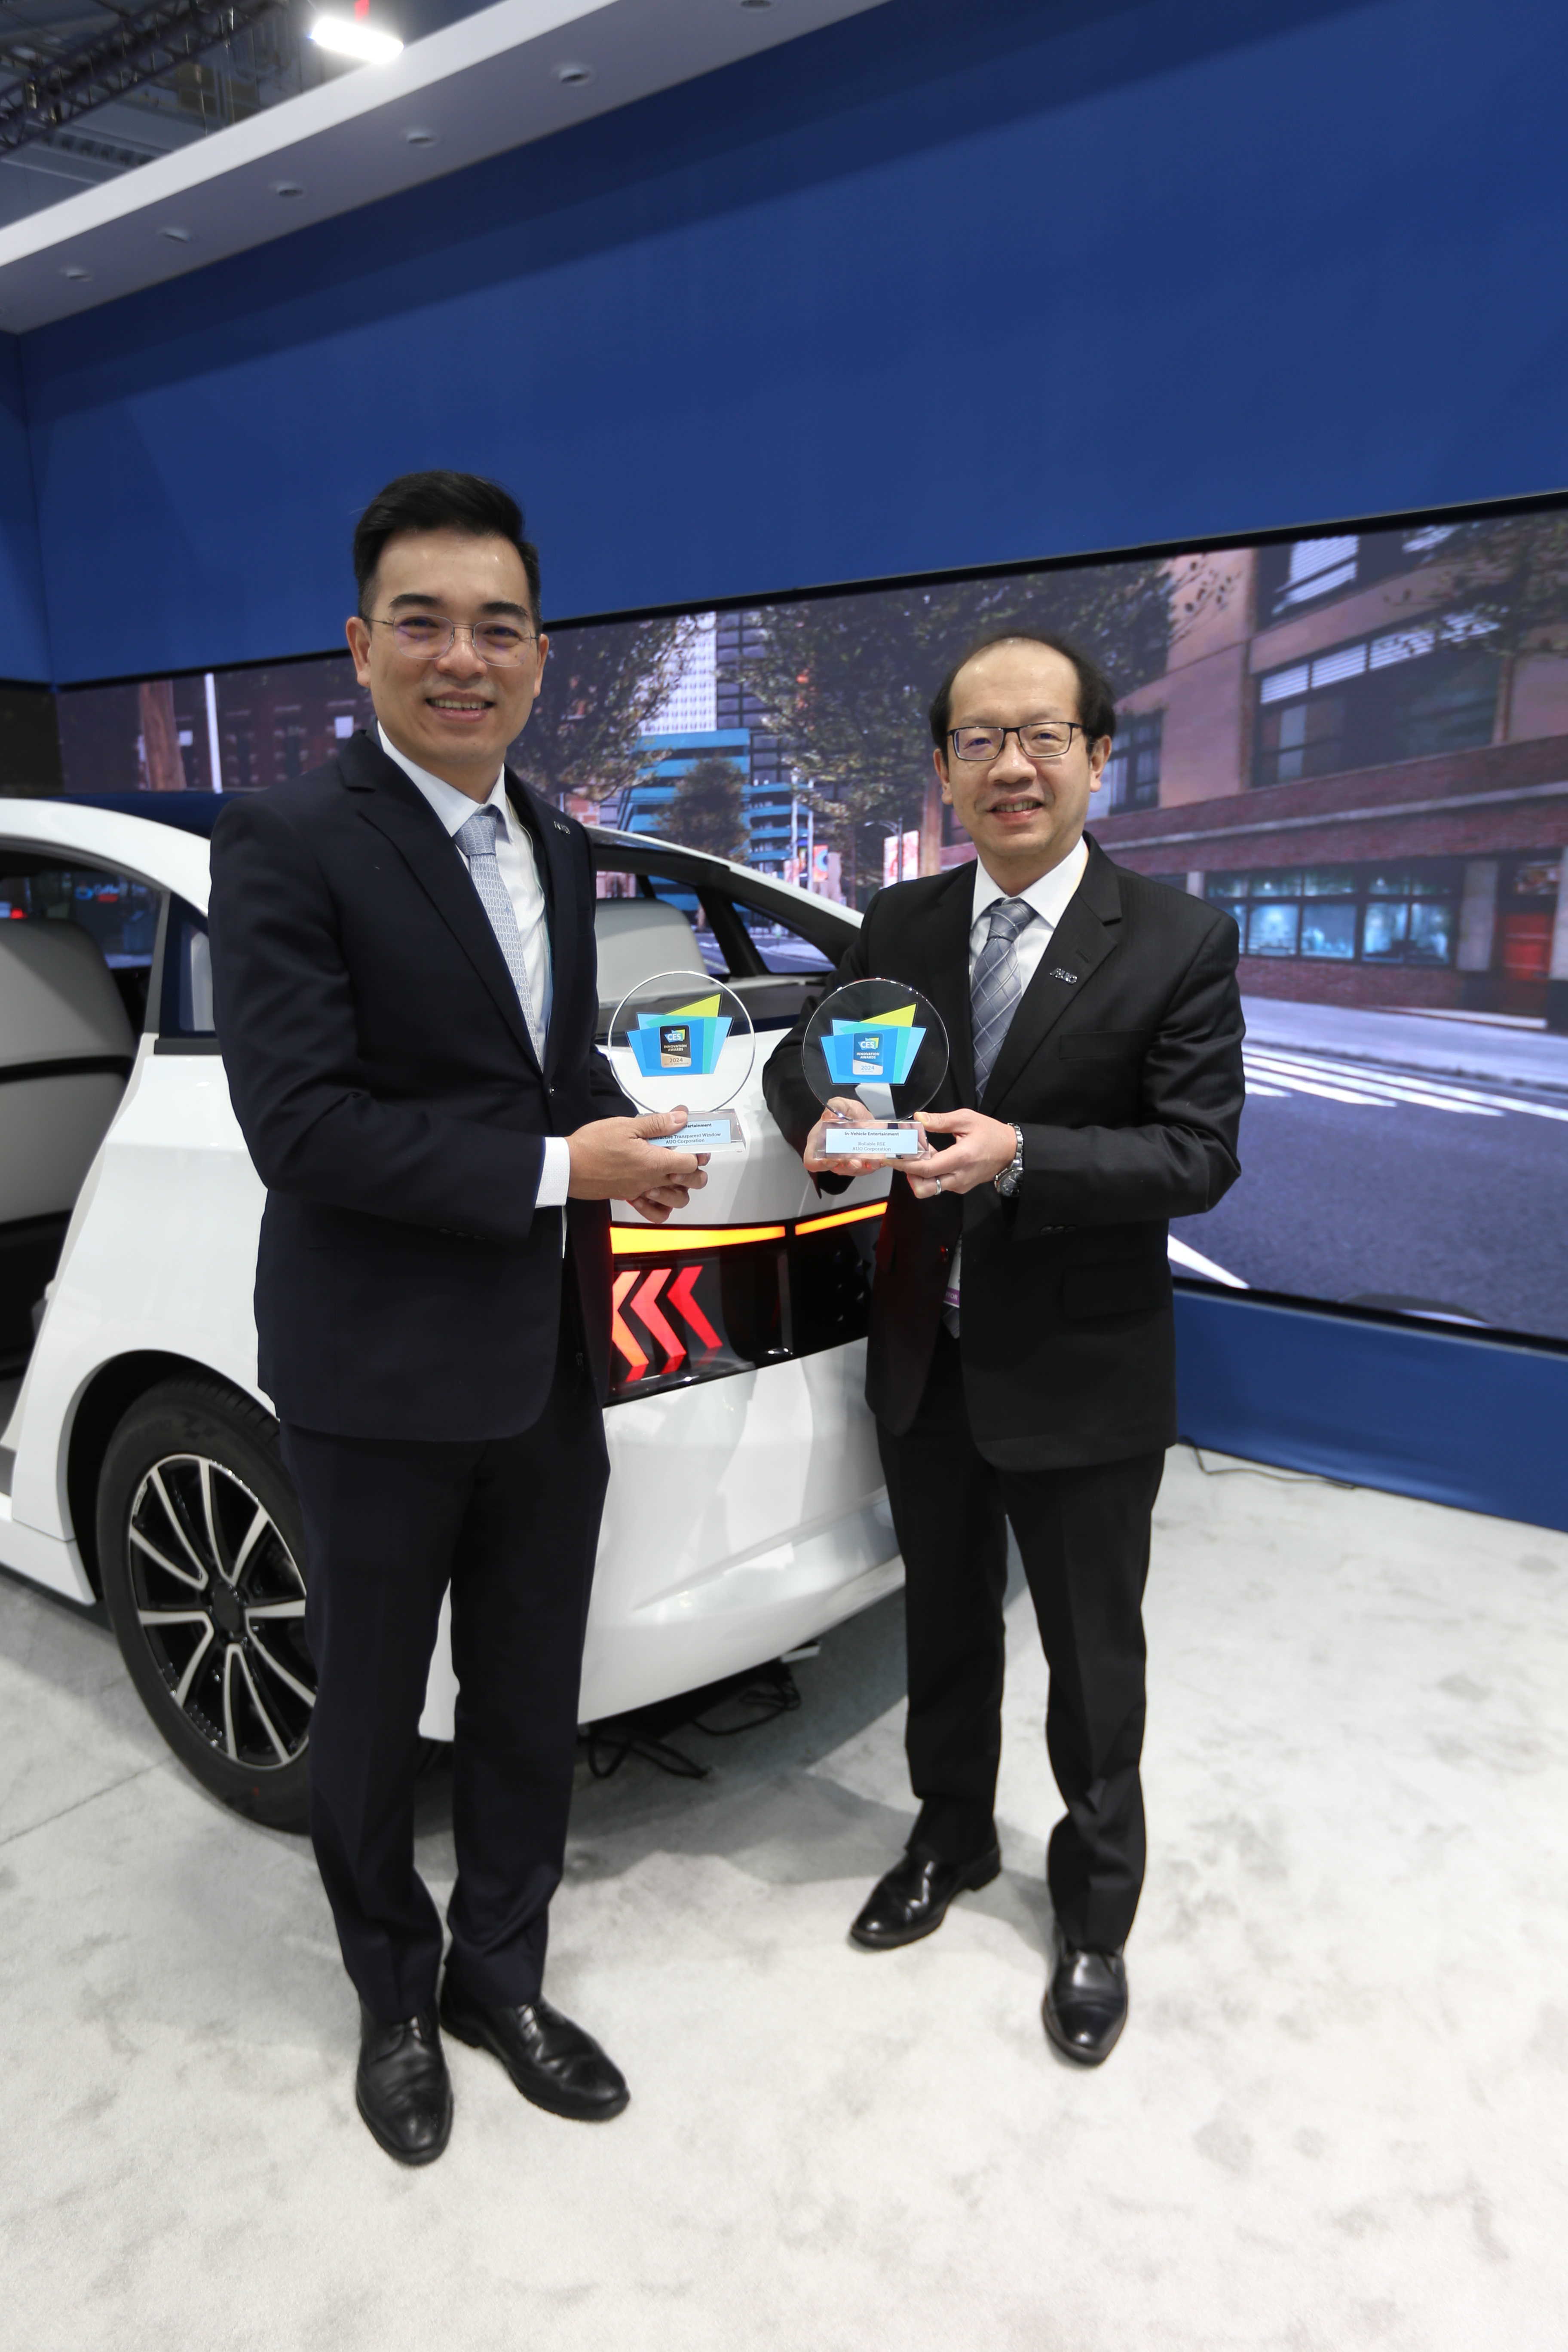 With its revolutionary breakthrough in micro LED automotive display applications, AUO has been named Honorees of the CES 2024 Best of Innovation and Innovation Awards. Pictured on the left is Dr. Frank Ko, CEO and President of AUO, and on the right, Dr. Wei-Lung Liau, CTO of AUO.